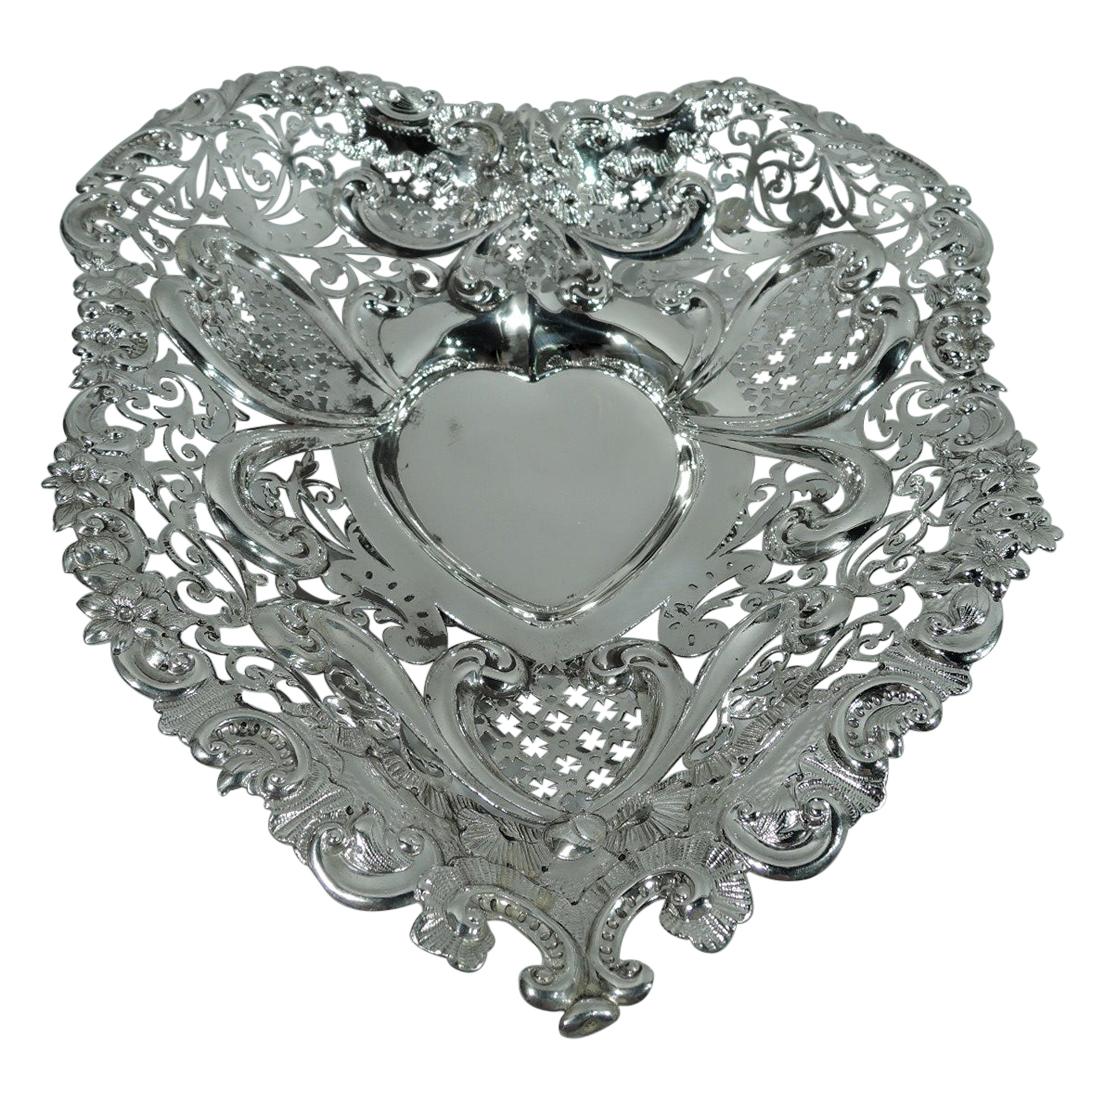 Super Big and Super Romantic Sterling Silver Heart Bowl by Gorham